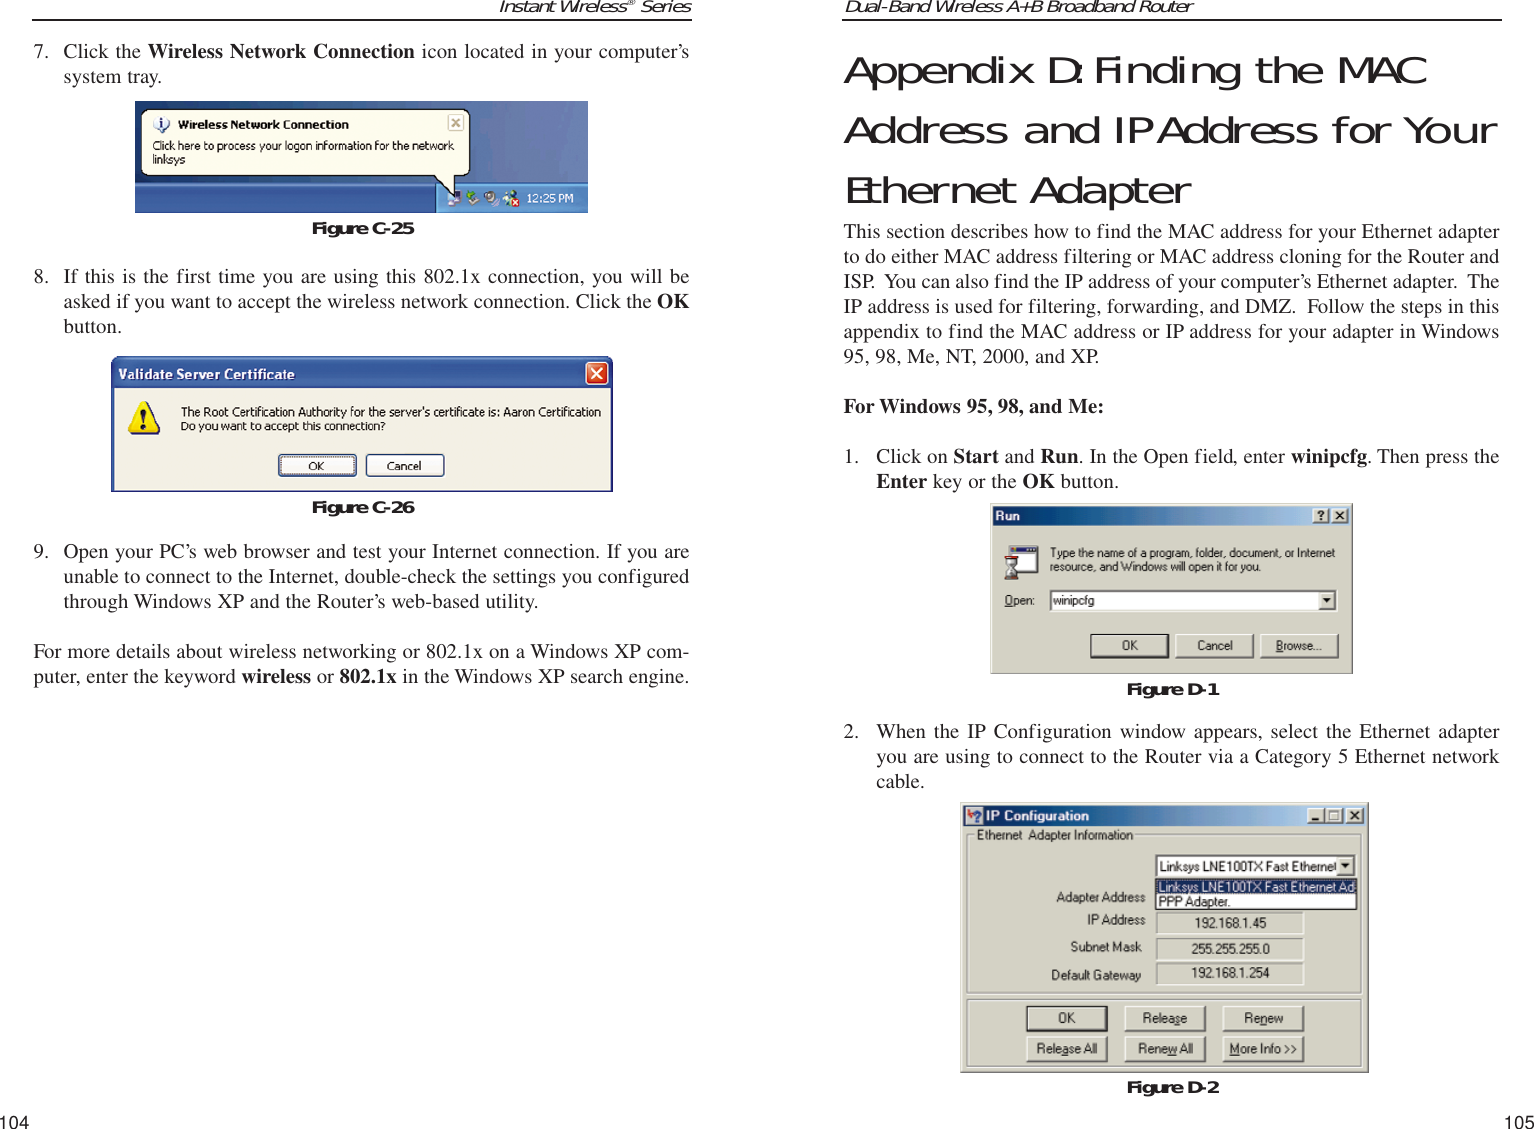 Dual-Band Wireless A+B Broadband Router Appendix D:Finding the MACAddress and IPAddress for YourEthernet AdapterThis section describes how to find the MAC address for your Ethernet adapterto do either MAC address filtering or MAC address cloning for the Router andISP.  You can also find the IP address of your computer’s Ethernet adapter.  TheIP address is used for filtering, forwarding, and DMZ.  Follow the steps in thisappendix to find the MAC address or IP address for your adapter in Windows95, 98, Me, NT, 2000, and XP. For Windows 95, 98, and Me:1. Click on Start and Run. In the Open field, enter winipcfg. Then press theEnter key or the OK button.2.  When the IP Configuration window appears, select the Ethernet adapteryou are using to connect to the Router via a Category 5 Ethernet networkcable.105Instant Wireless®Series7. Click the Wireless Network Connection icon located in your computer’ssystem tray.   8. If this is the first time you are using this 802.1x connection, you will beasked if you want to accept the wireless network connection. Click the OKbutton.9. Open your PC’s web browser and test your Internet connection. If you areunable to connect to the Internet, double-check the settings you configuredthrough Windows XP and the Router’s web-based utility.For more details about wireless networking or 802.1x on a Windows XP com-puter, enter the keyword wireless or 802.1x in the Windows XP search engine.104Figure D-1Figure D-2Figure C-25Figure C-26